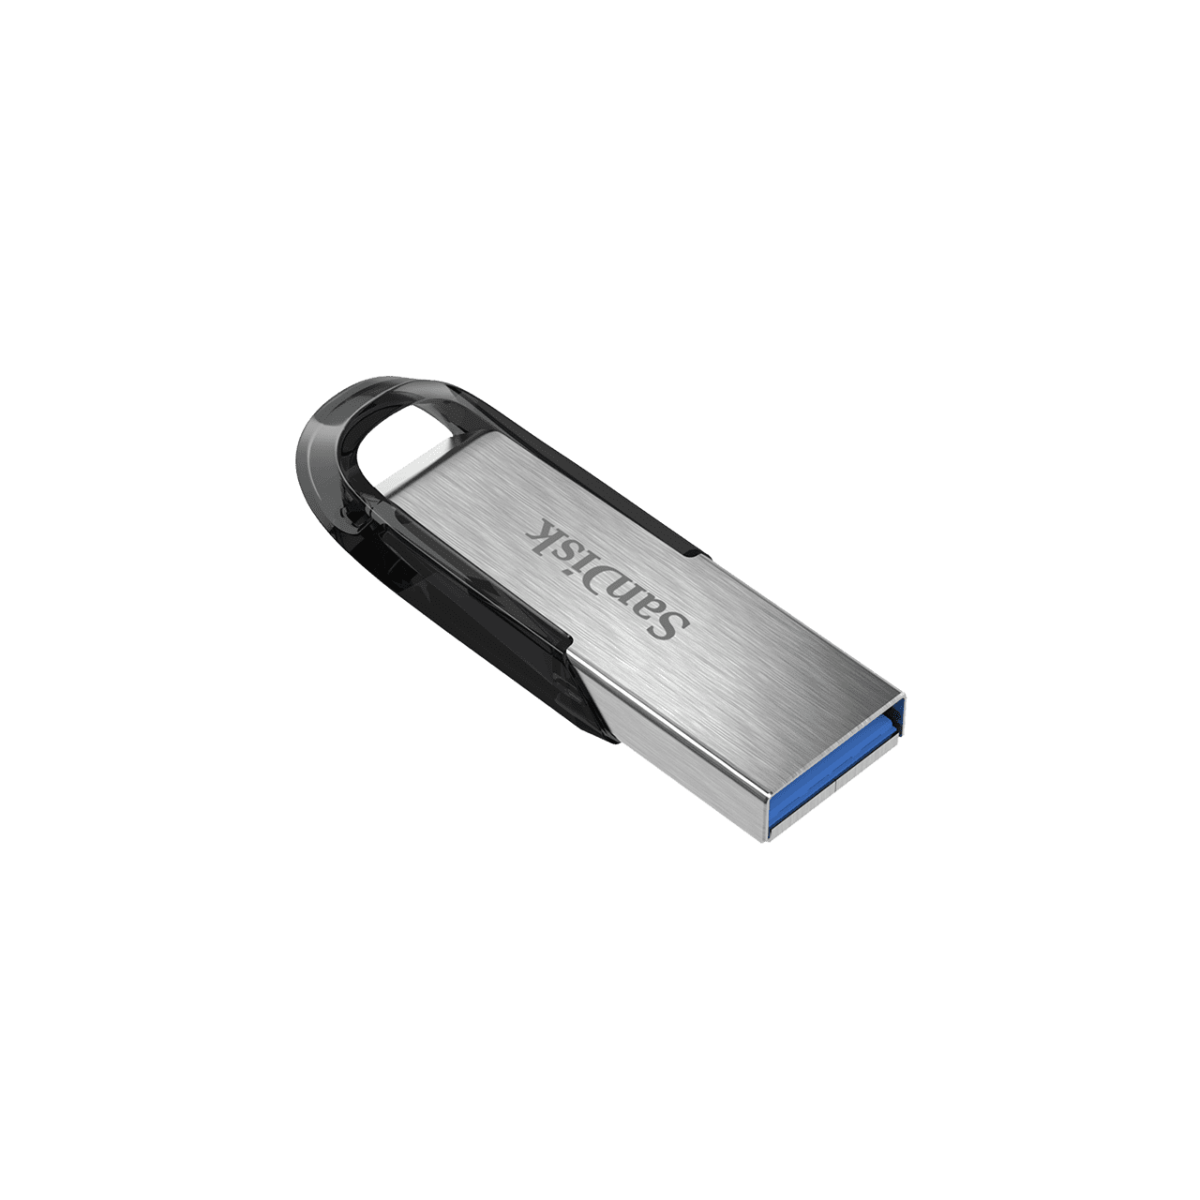 Ultra Flair Usb 3 0 Left.png.thumb .1280.1280 Sandisk &Lt;Div Class=&Quot;Inheritpara Mb-4&Quot;&Gt; The Sandisk Ultra Flair™ Usb 3.0 Flash Drive Moves Your Files Fast. Spend Less Time Waiting To Transfer Files And Enjoy High-Speed Usb 3.0 Performance Of Up To 150Mb/S&Lt;A Class=&Quot;Disclosure&Quot; Href=&Quot;Https://Shop.westerndigital.com/Products/Usb-Flash-Drives/Sandisk-Ultra-Flair-Usb-3-0#Disclosures&Quot; Target=&Quot;_Self&Quot; Rel=&Quot;Noopener Noreferrer&Quot; Aria-Labelledby=&Quot;Disclosures&Quot;&Gt;&Lt;Sup&Gt;**&Lt;/Sup&Gt;&Lt;/A&Gt;. Its Durable And Sleek Metal Casing Is Tough Enough To Handle Knocks With Style. And, With Password Protection, You Can Rest Assured That Your Private Files Stay Private&Lt;A Class=&Quot;Disclosure&Quot; Href=&Quot;Https://Shop.westerndigital.com/Products/Usb-Flash-Drives/Sandisk-Ultra-Flair-Usb-3-0#Disclosures&Quot; Target=&Quot;_Self&Quot; Rel=&Quot;Noopener Noreferrer&Quot; Aria-Labelledby=&Quot;Disclosures&Quot;&Gt;&Lt;Sup&Gt;1&Lt;/Sup&Gt;&Lt;/A&Gt;. Store Your Files In Style With The Sandisk Ultra Flair Usb 3.0 Flash Drive. &Lt;Strong&Gt;Warranty&Lt;/Strong&Gt; The Sandisk Ultra Flair Usb 3.0 Flash Drive Is Backed By A Five-Year Manufacturer Warranty&Lt;A Class=&Quot;Disclosure&Quot; Href=&Quot;Https://Shop.westerndigital.com/Products/Usb-Flash-Drives/Sandisk-Ultra-Flair-Usb-3-0#Disclosures&Quot; Target=&Quot;_Self&Quot; Rel=&Quot;Noopener Noreferrer&Quot; Aria-Labelledby=&Quot;Disclosures&Quot;&Gt;&Lt;Sup&Gt;2&Lt;/Sup&Gt;&Lt;/A&Gt; &Lt;/Div&Gt; Sandisk Sandisk Ultra Flair Usb 3.0 Flash Drive (32Gb)